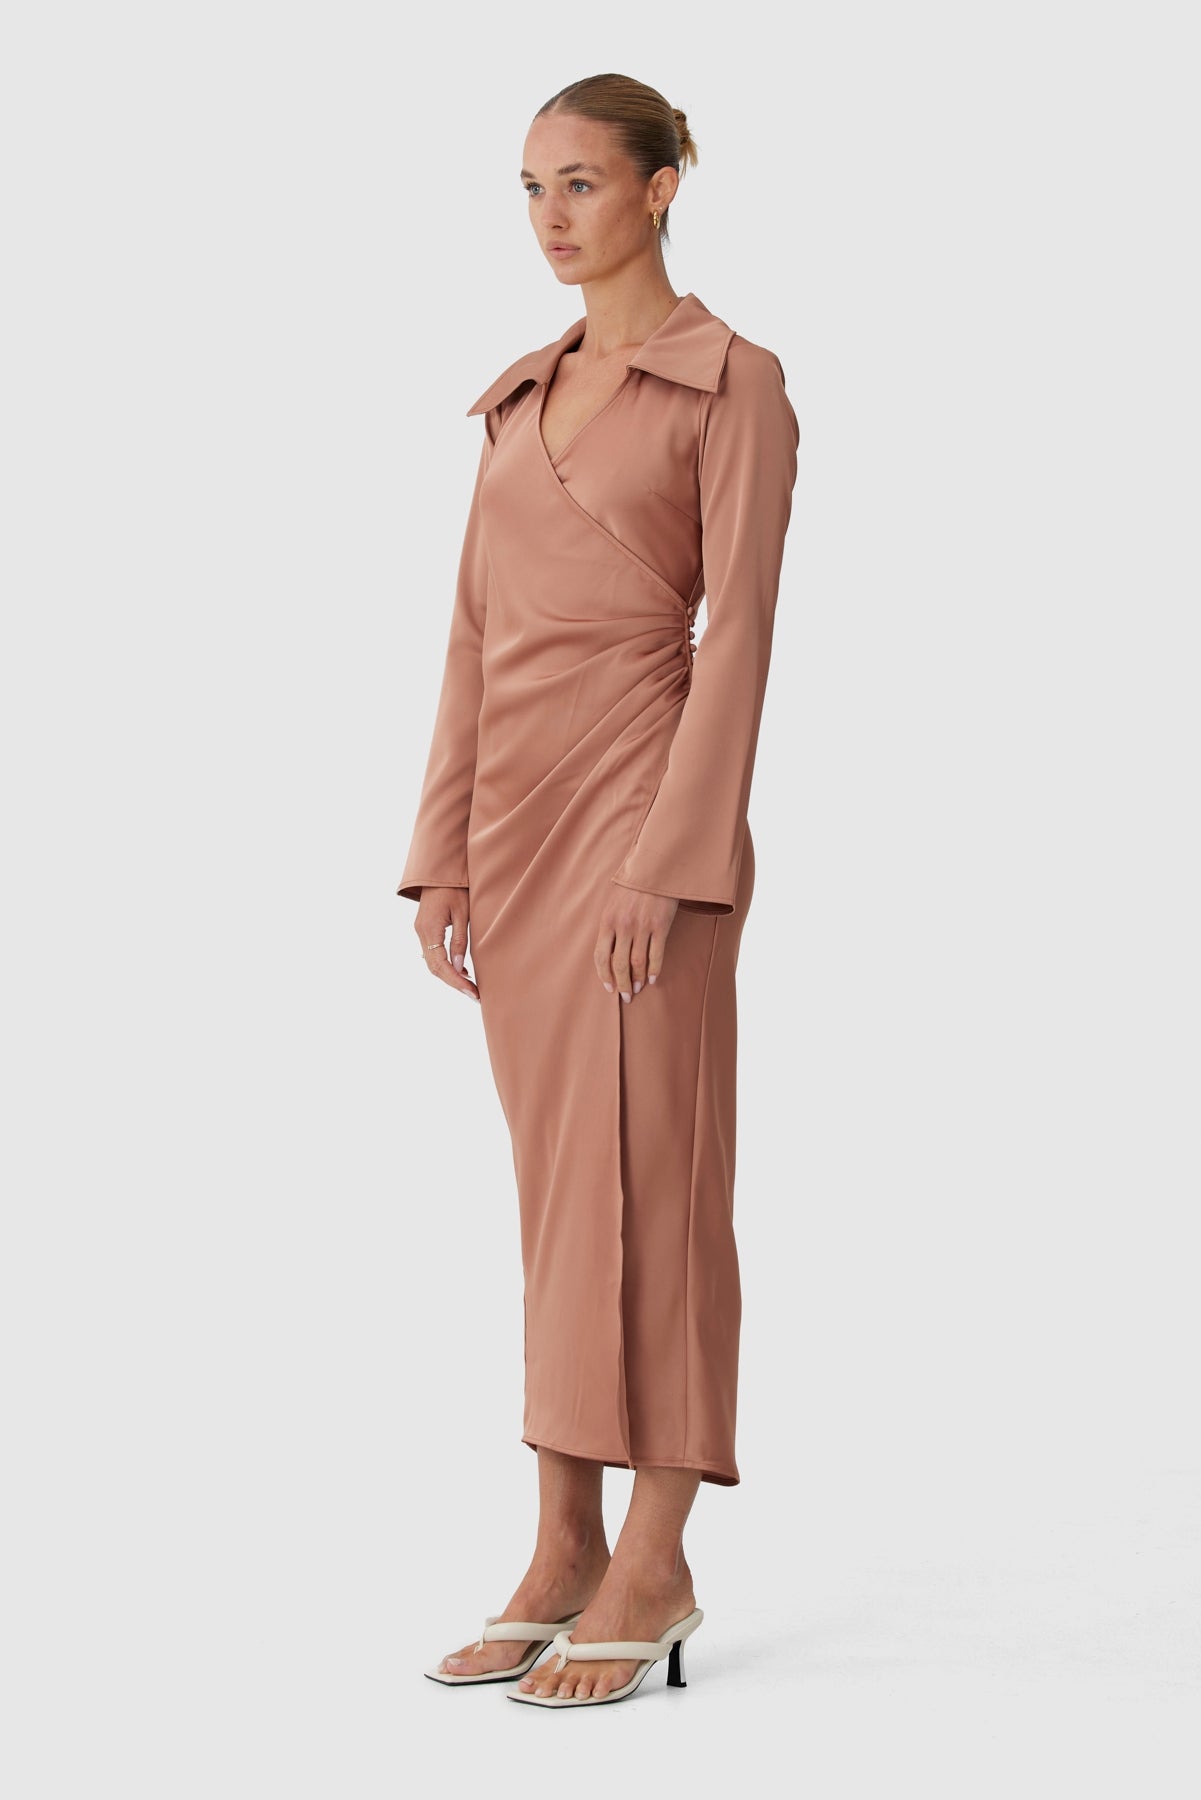 C/MEO Collective - Be Honest Dress - Brown